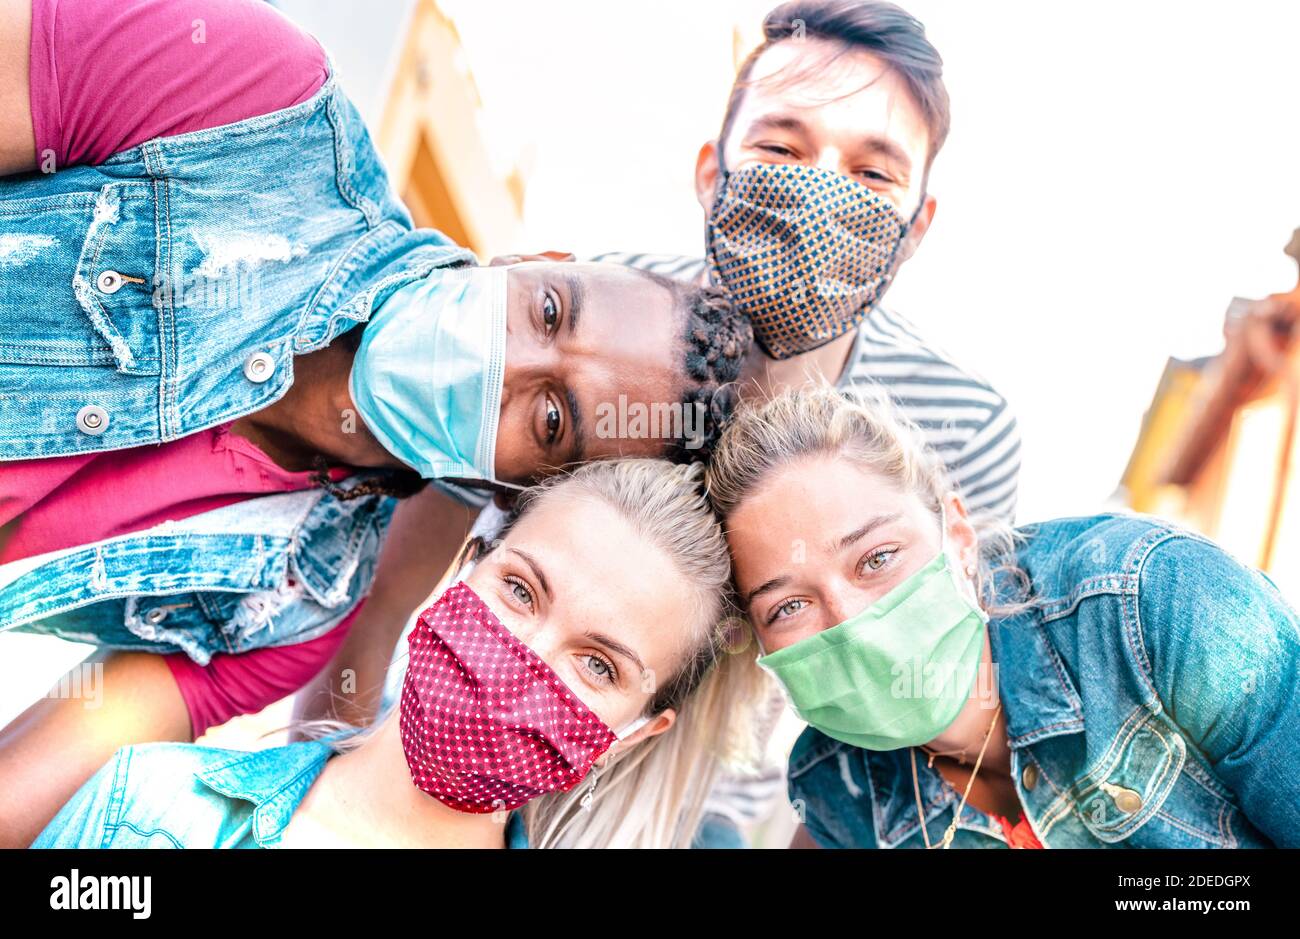 Multiracial millenial friends taking selfie smiling behind face masks - Happy friendship and new normal concept with young people having fun together Stock Photo